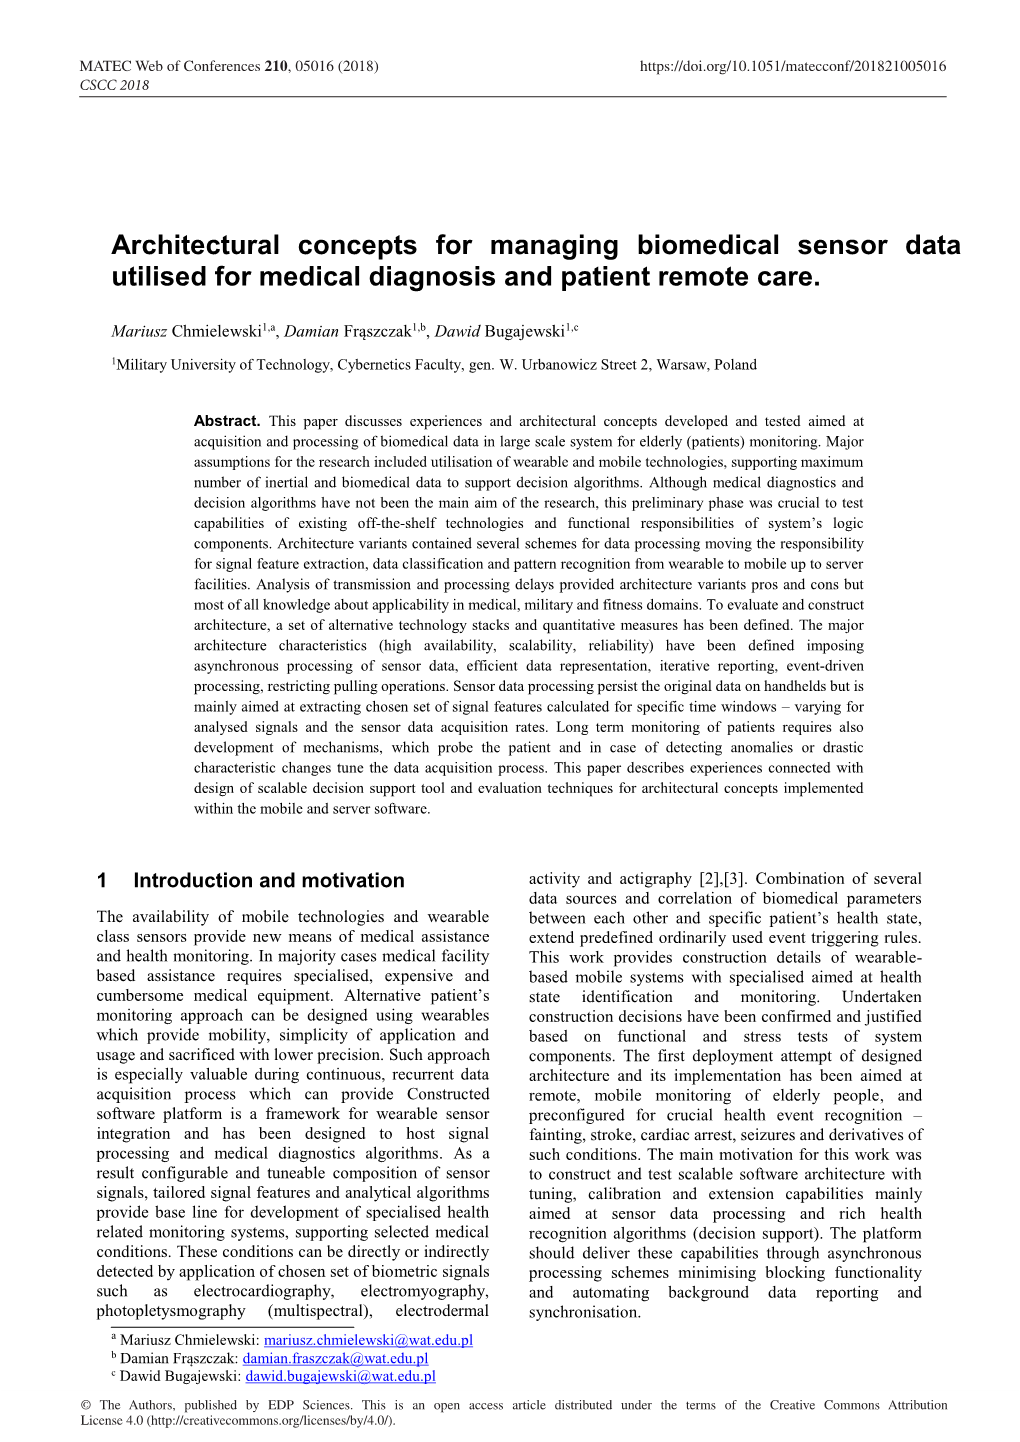 Architectural Concepts for Managing Biomedical Sensor Data Utilised for Medical Diagnosis and Patient Remote Care